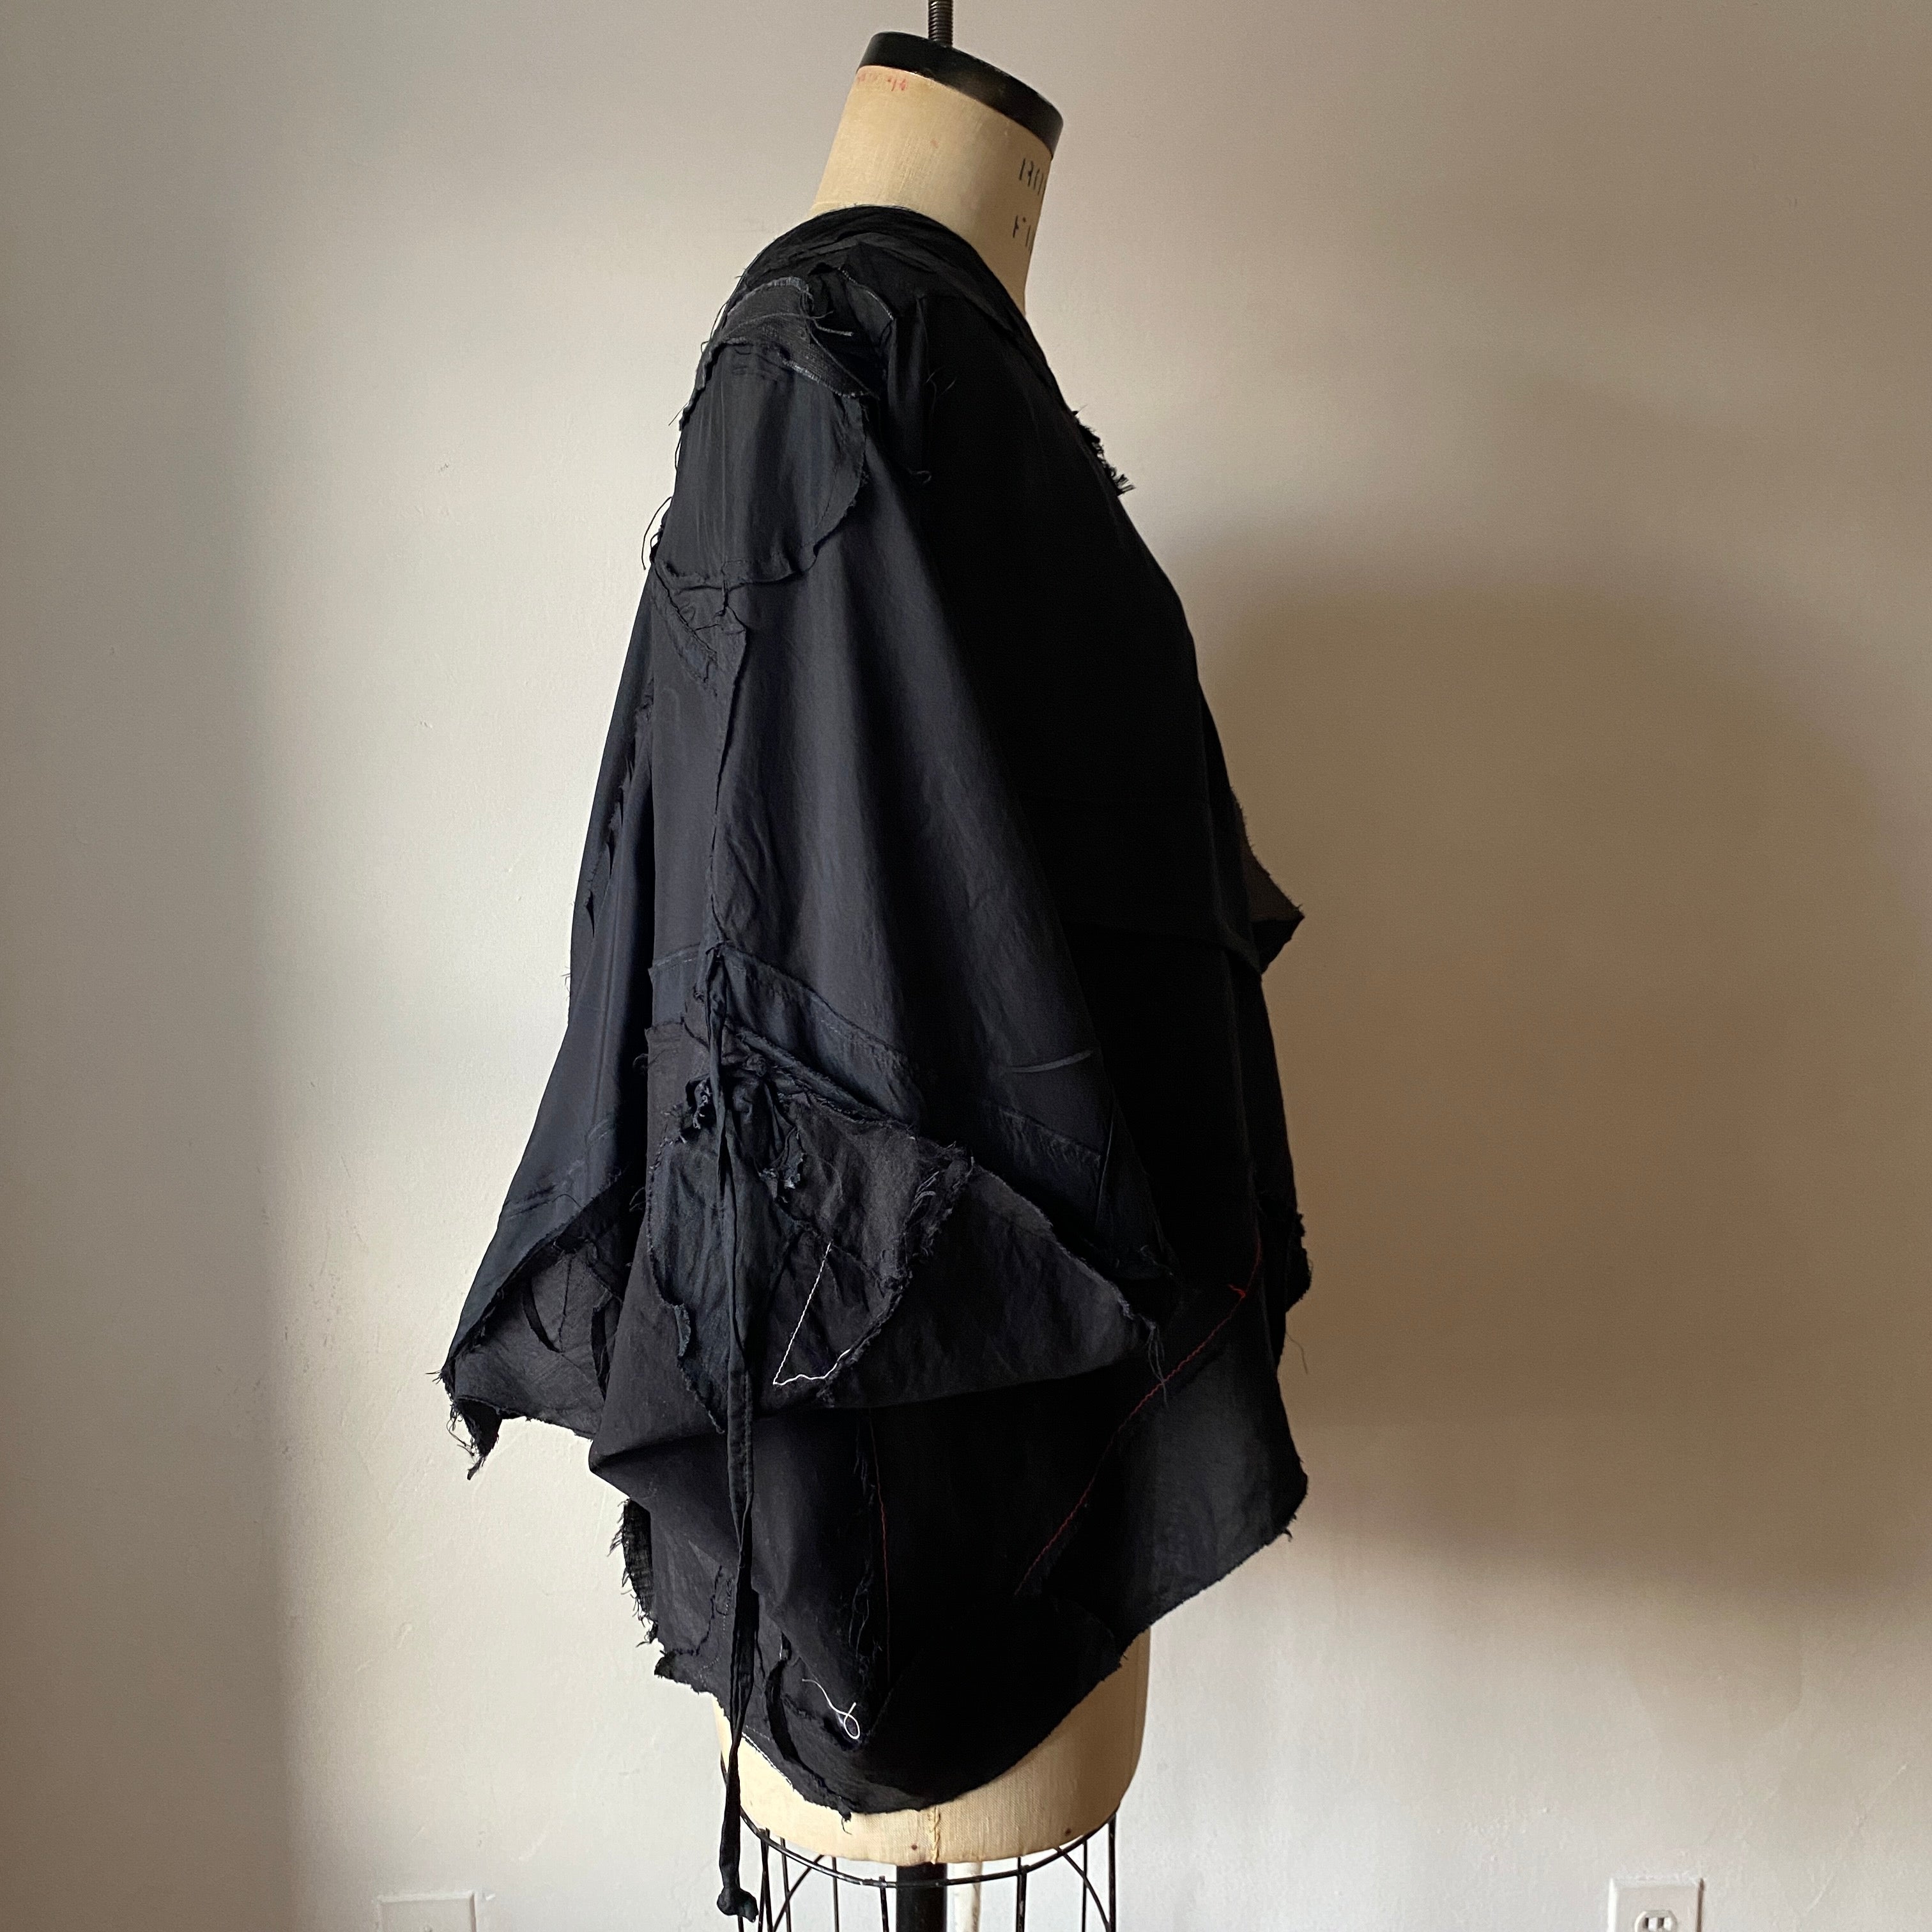 agender | kammacloth...one of a kind...size 3-4 or medium, chrysalis poncho with ties... ready to buy